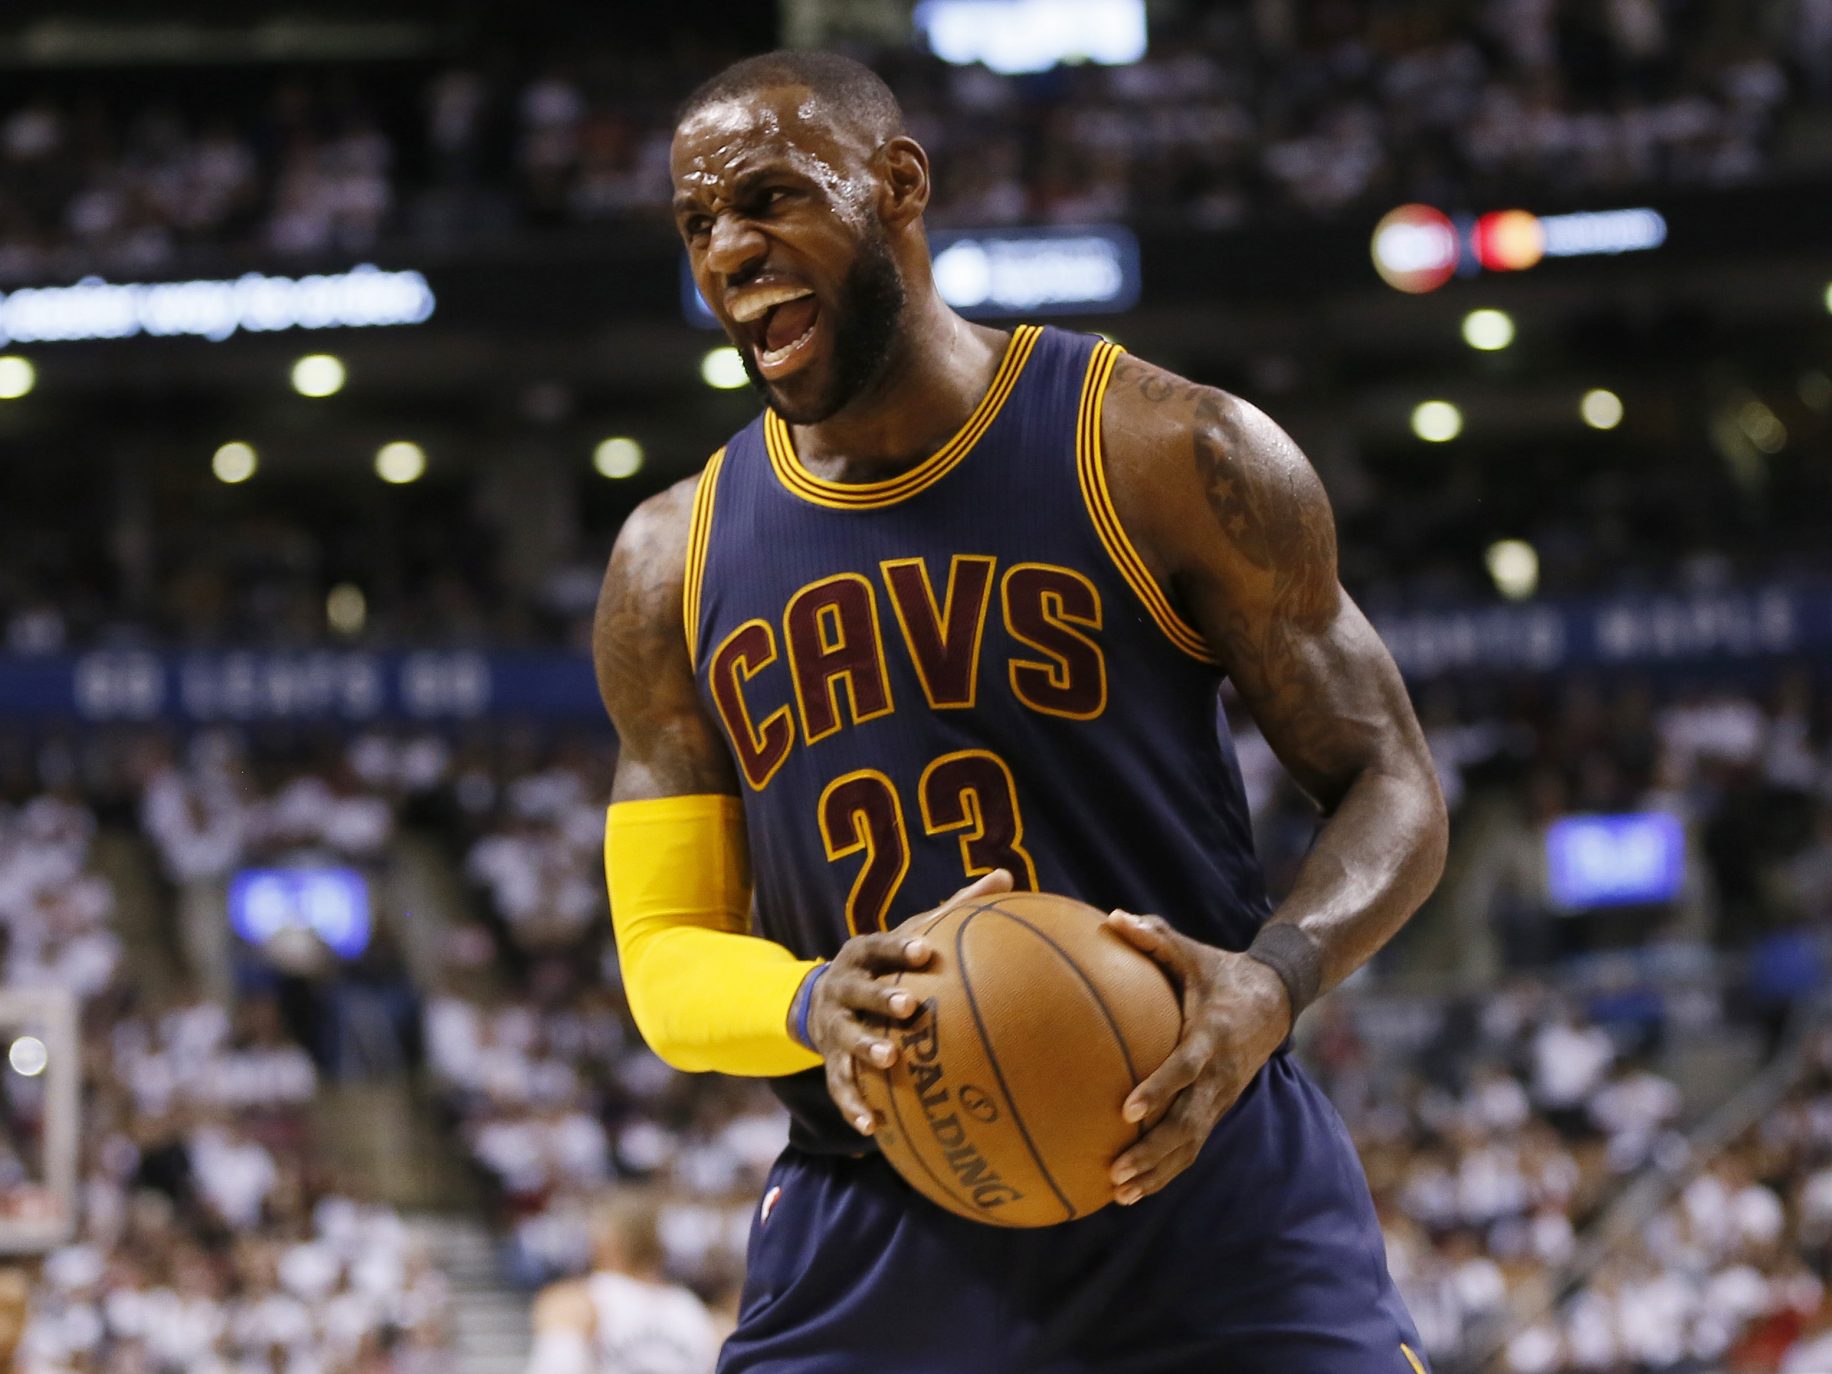 Does LeBron James Have to Win the NBA Championship this Season to Cement Legacy? 